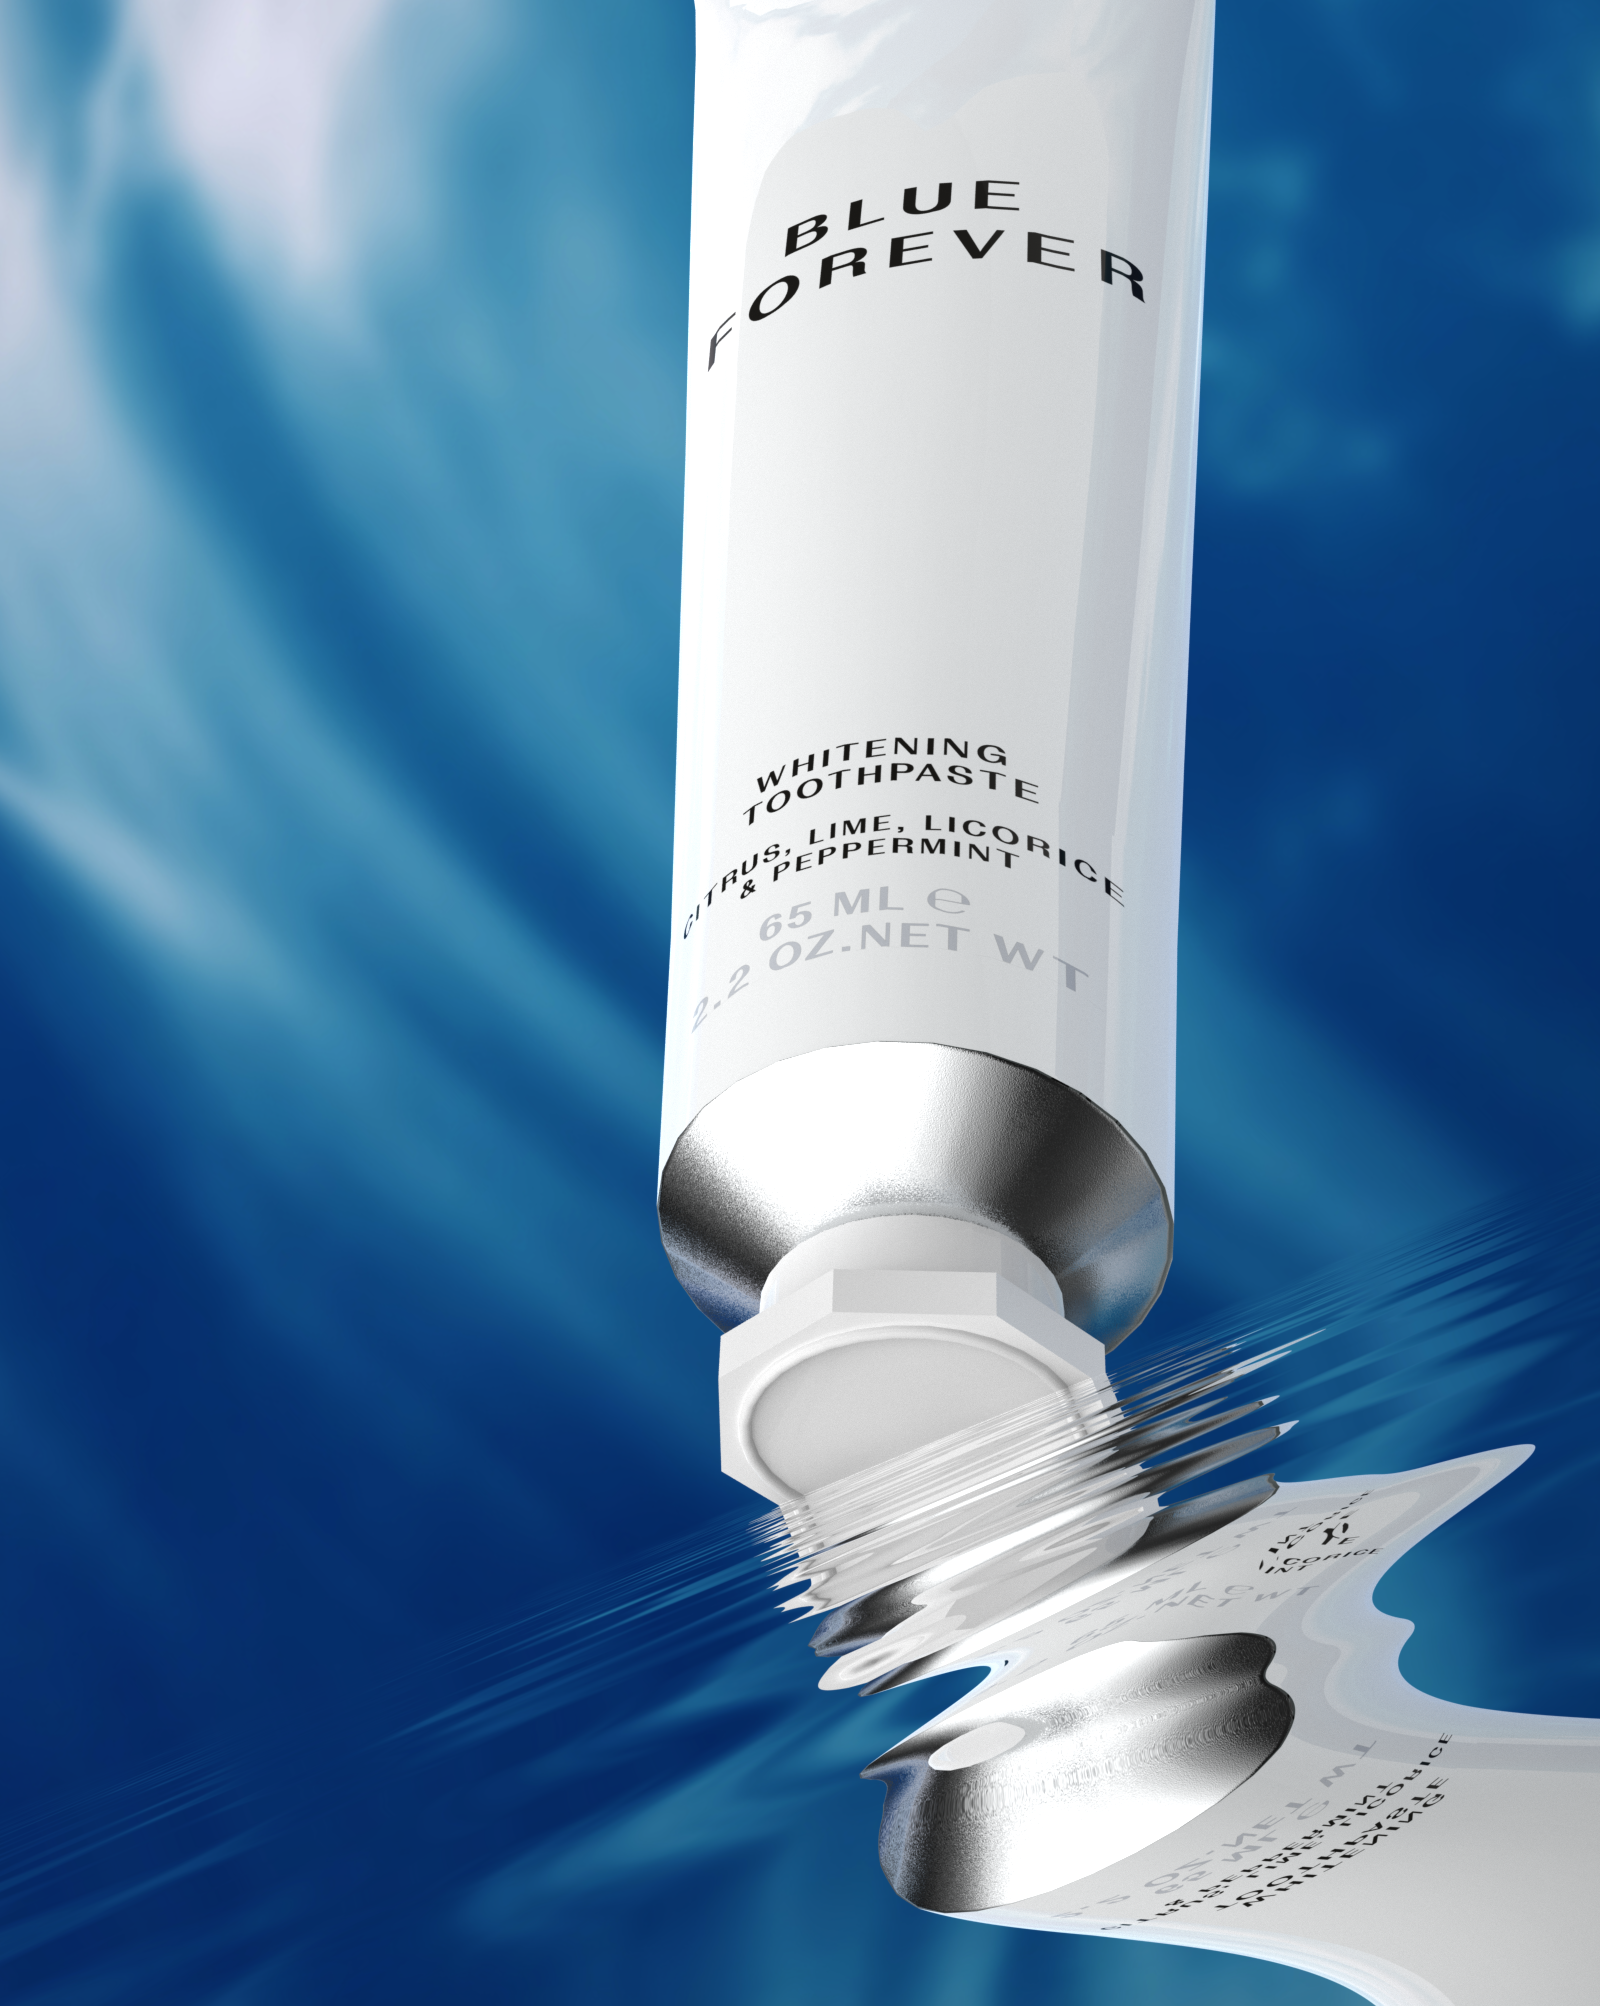 Blue Forever Toothpaste 65ml